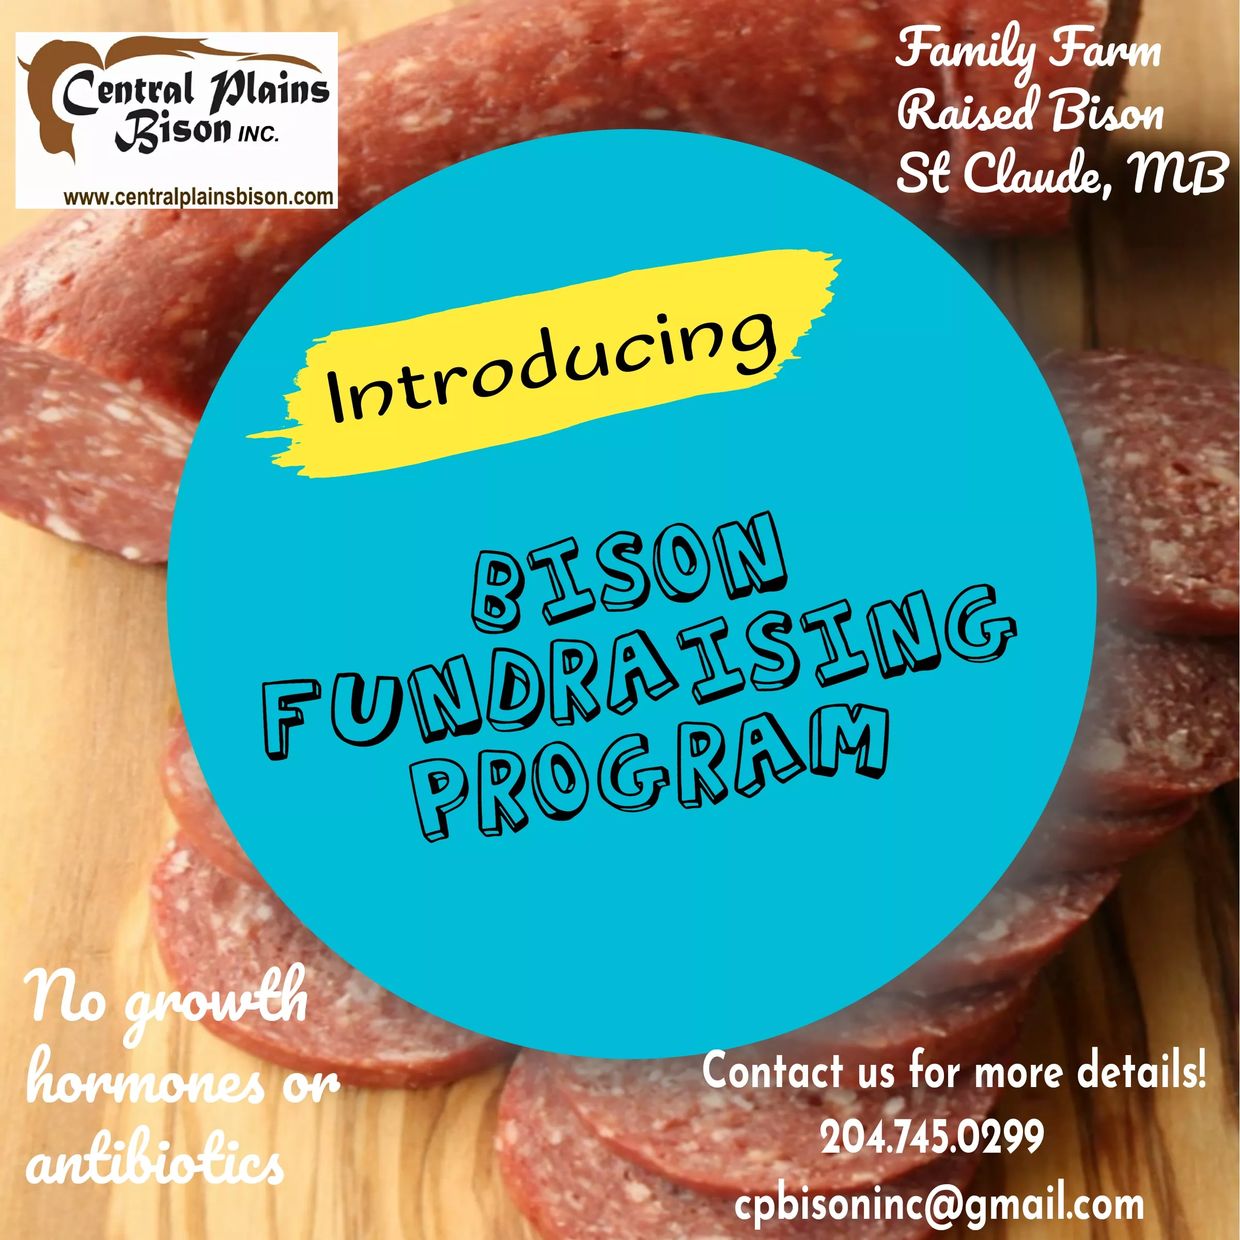 Contact us for more information regarding our bison meat fundraising program!